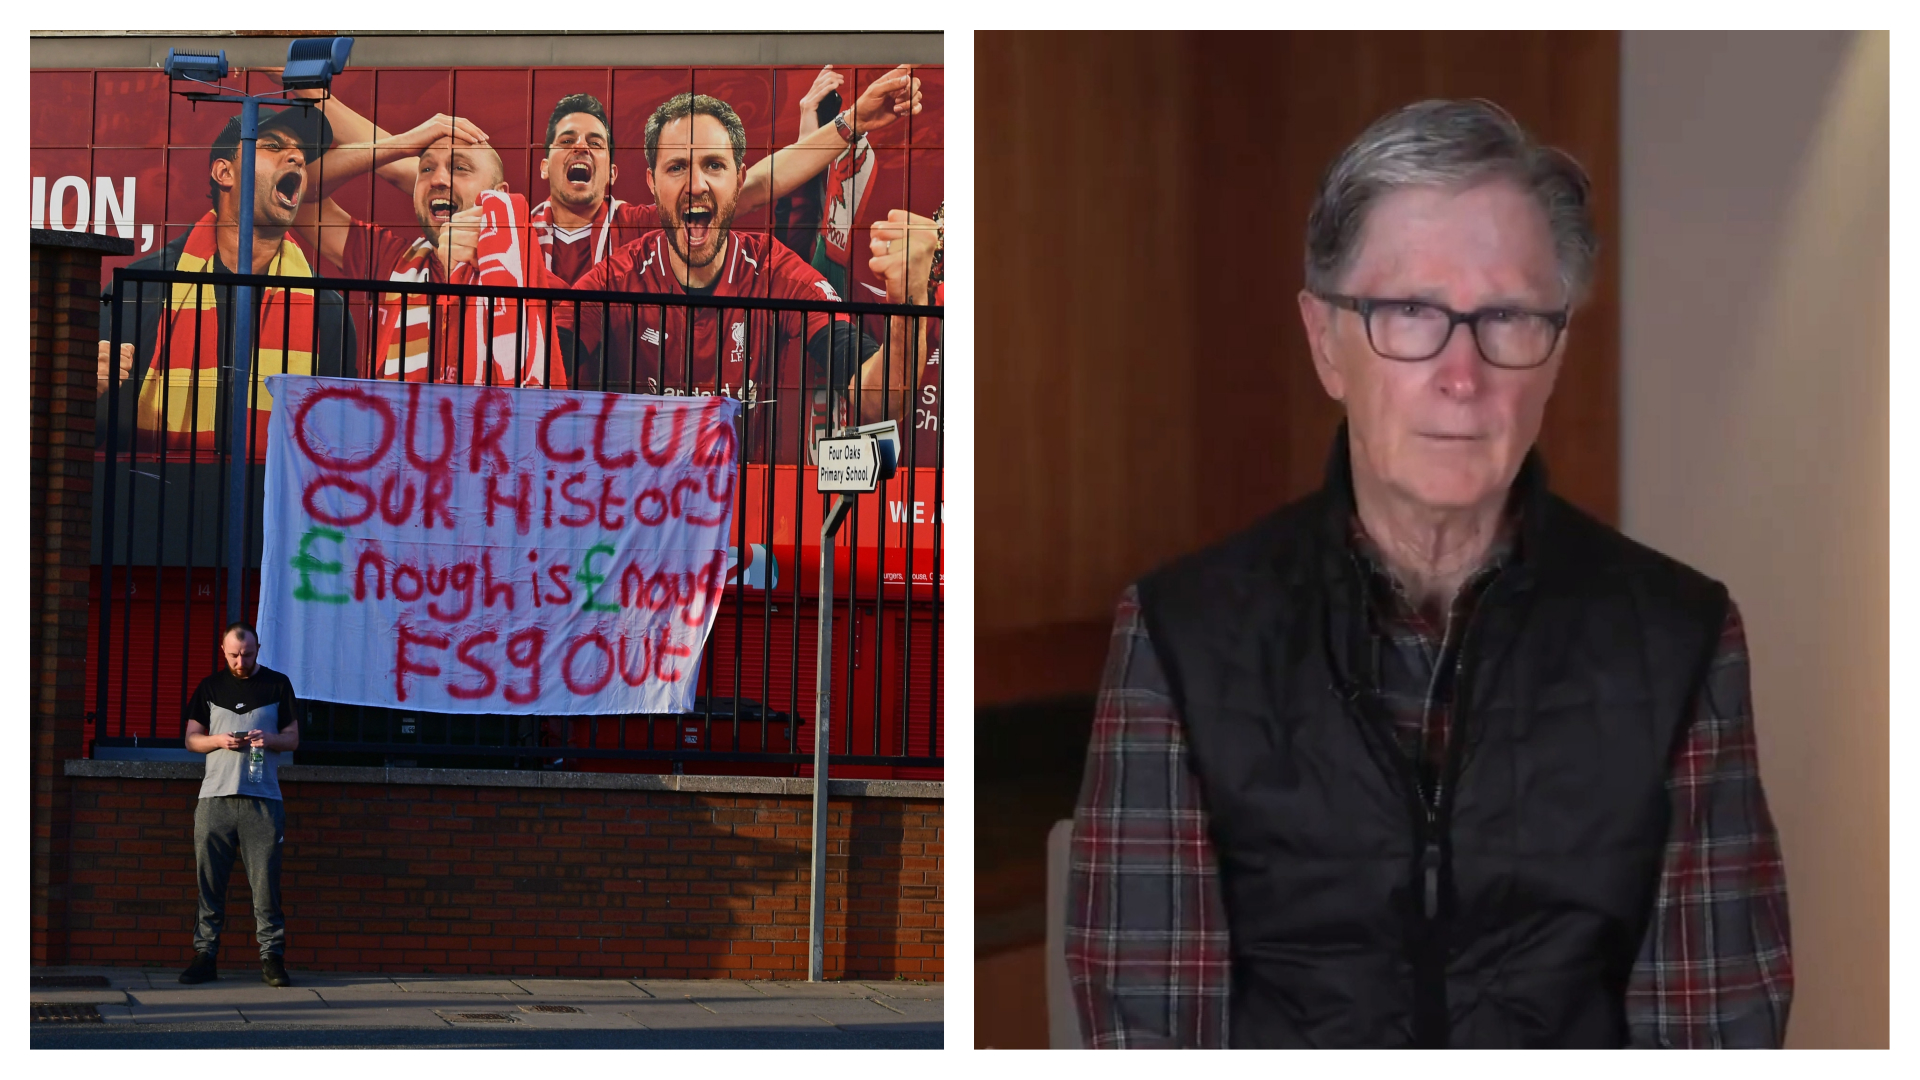 John W Henry's message to Liverpool supporters - Liverpool FC